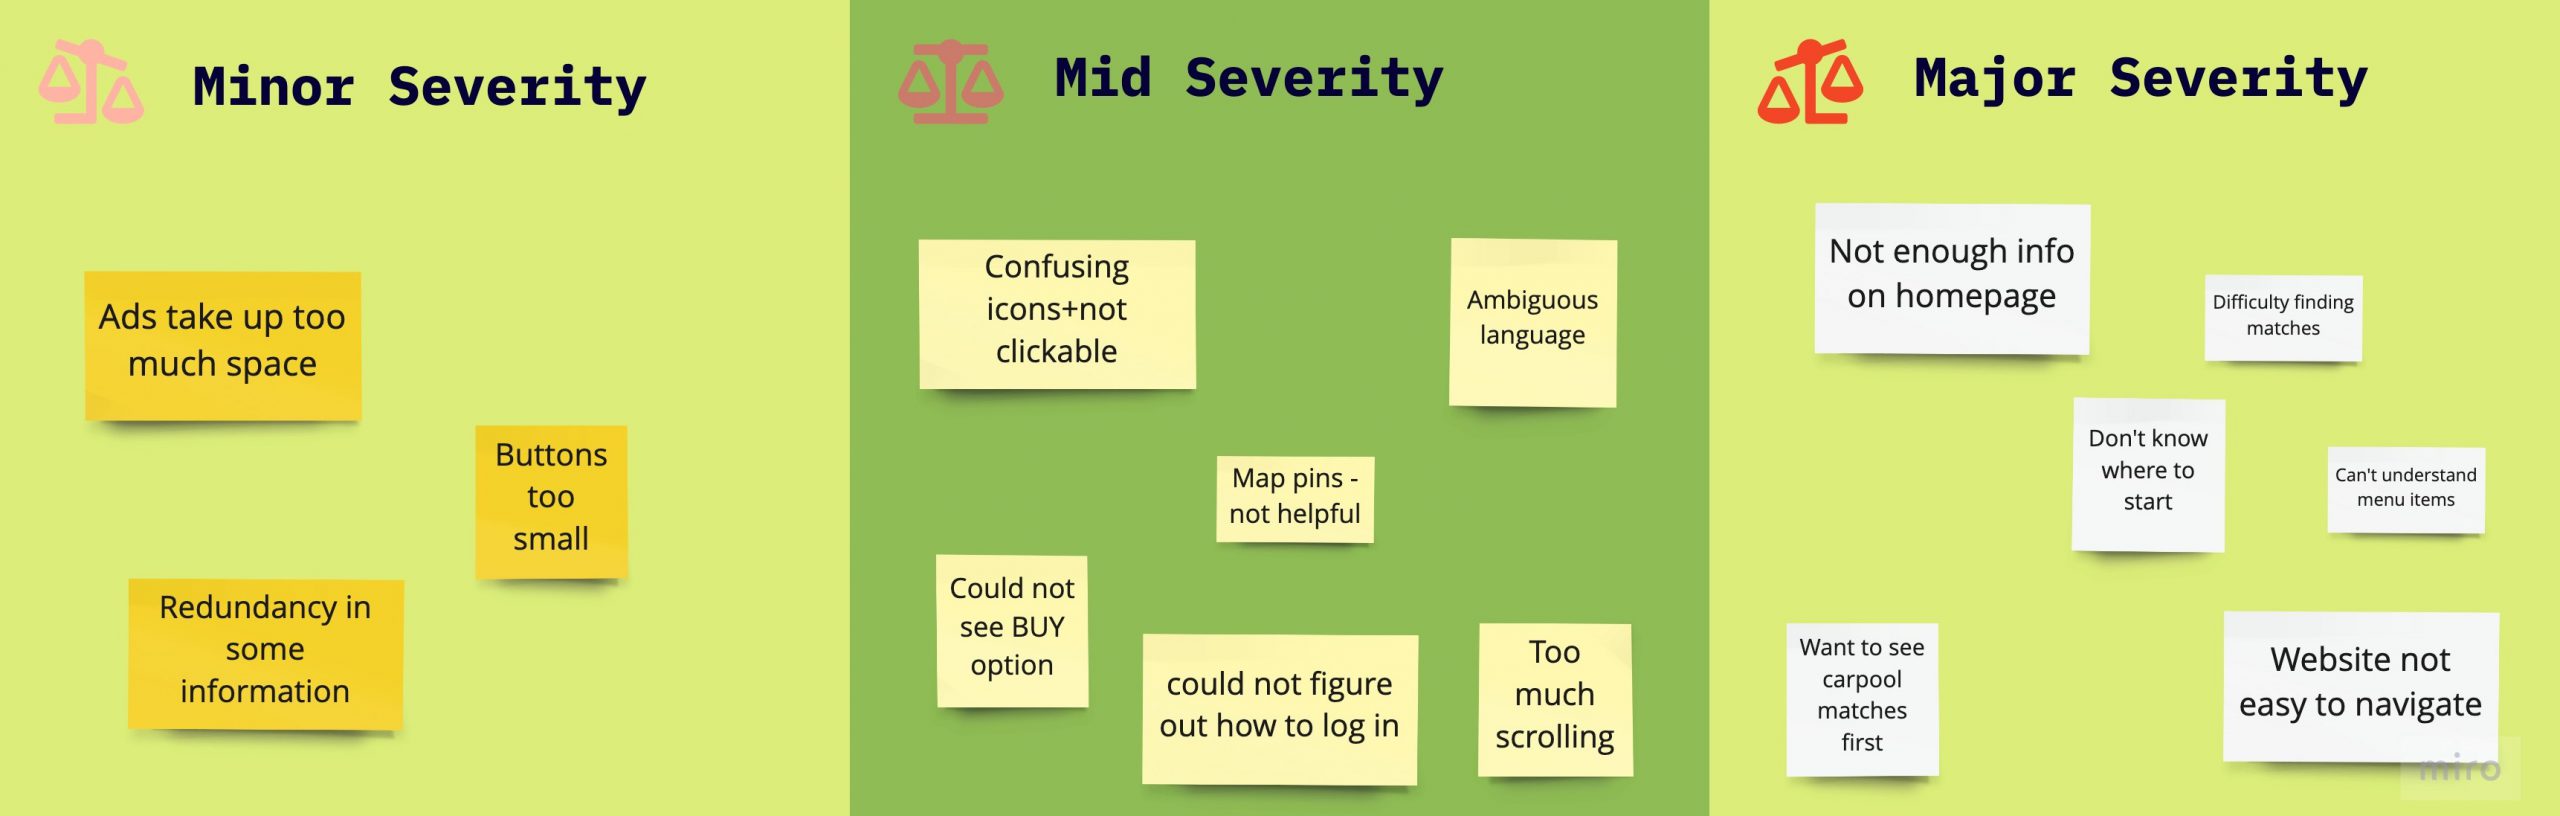 severity_rating